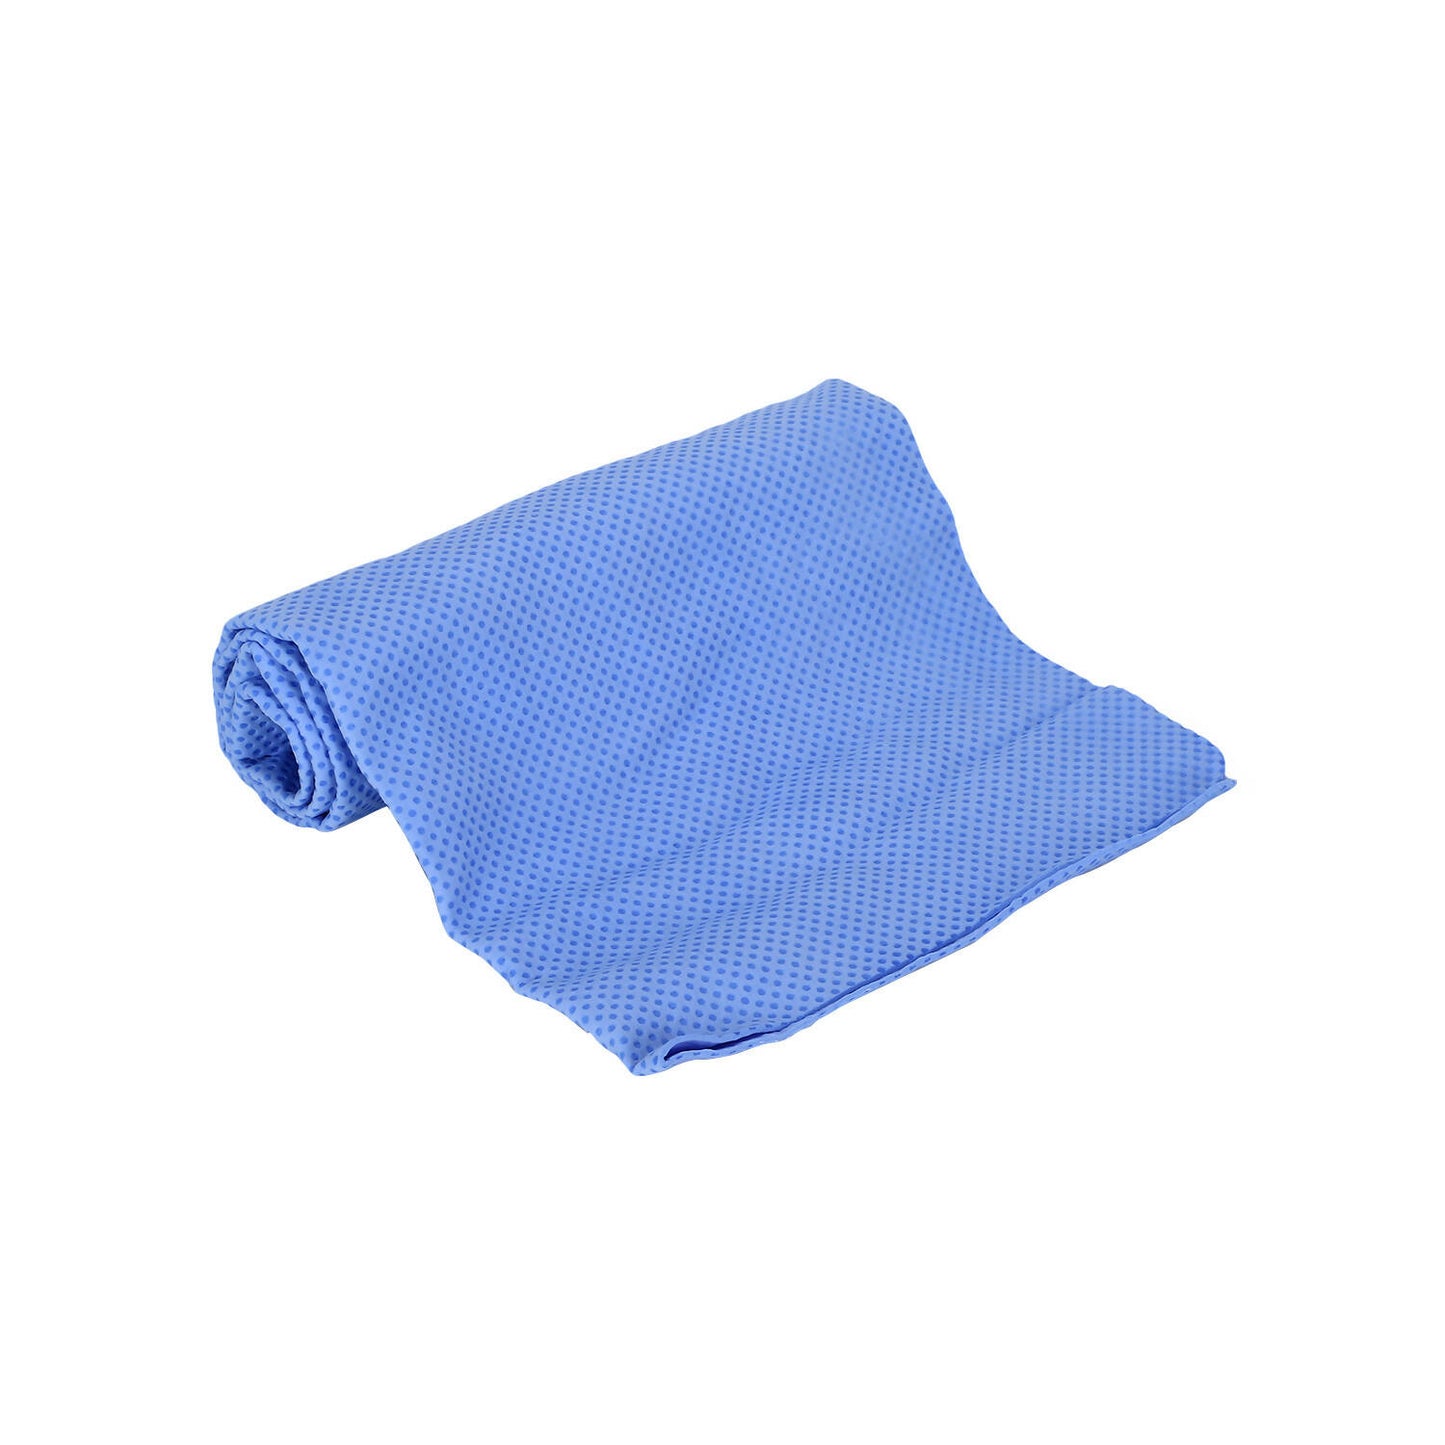 Basil - Absorbent Towel For Dogs